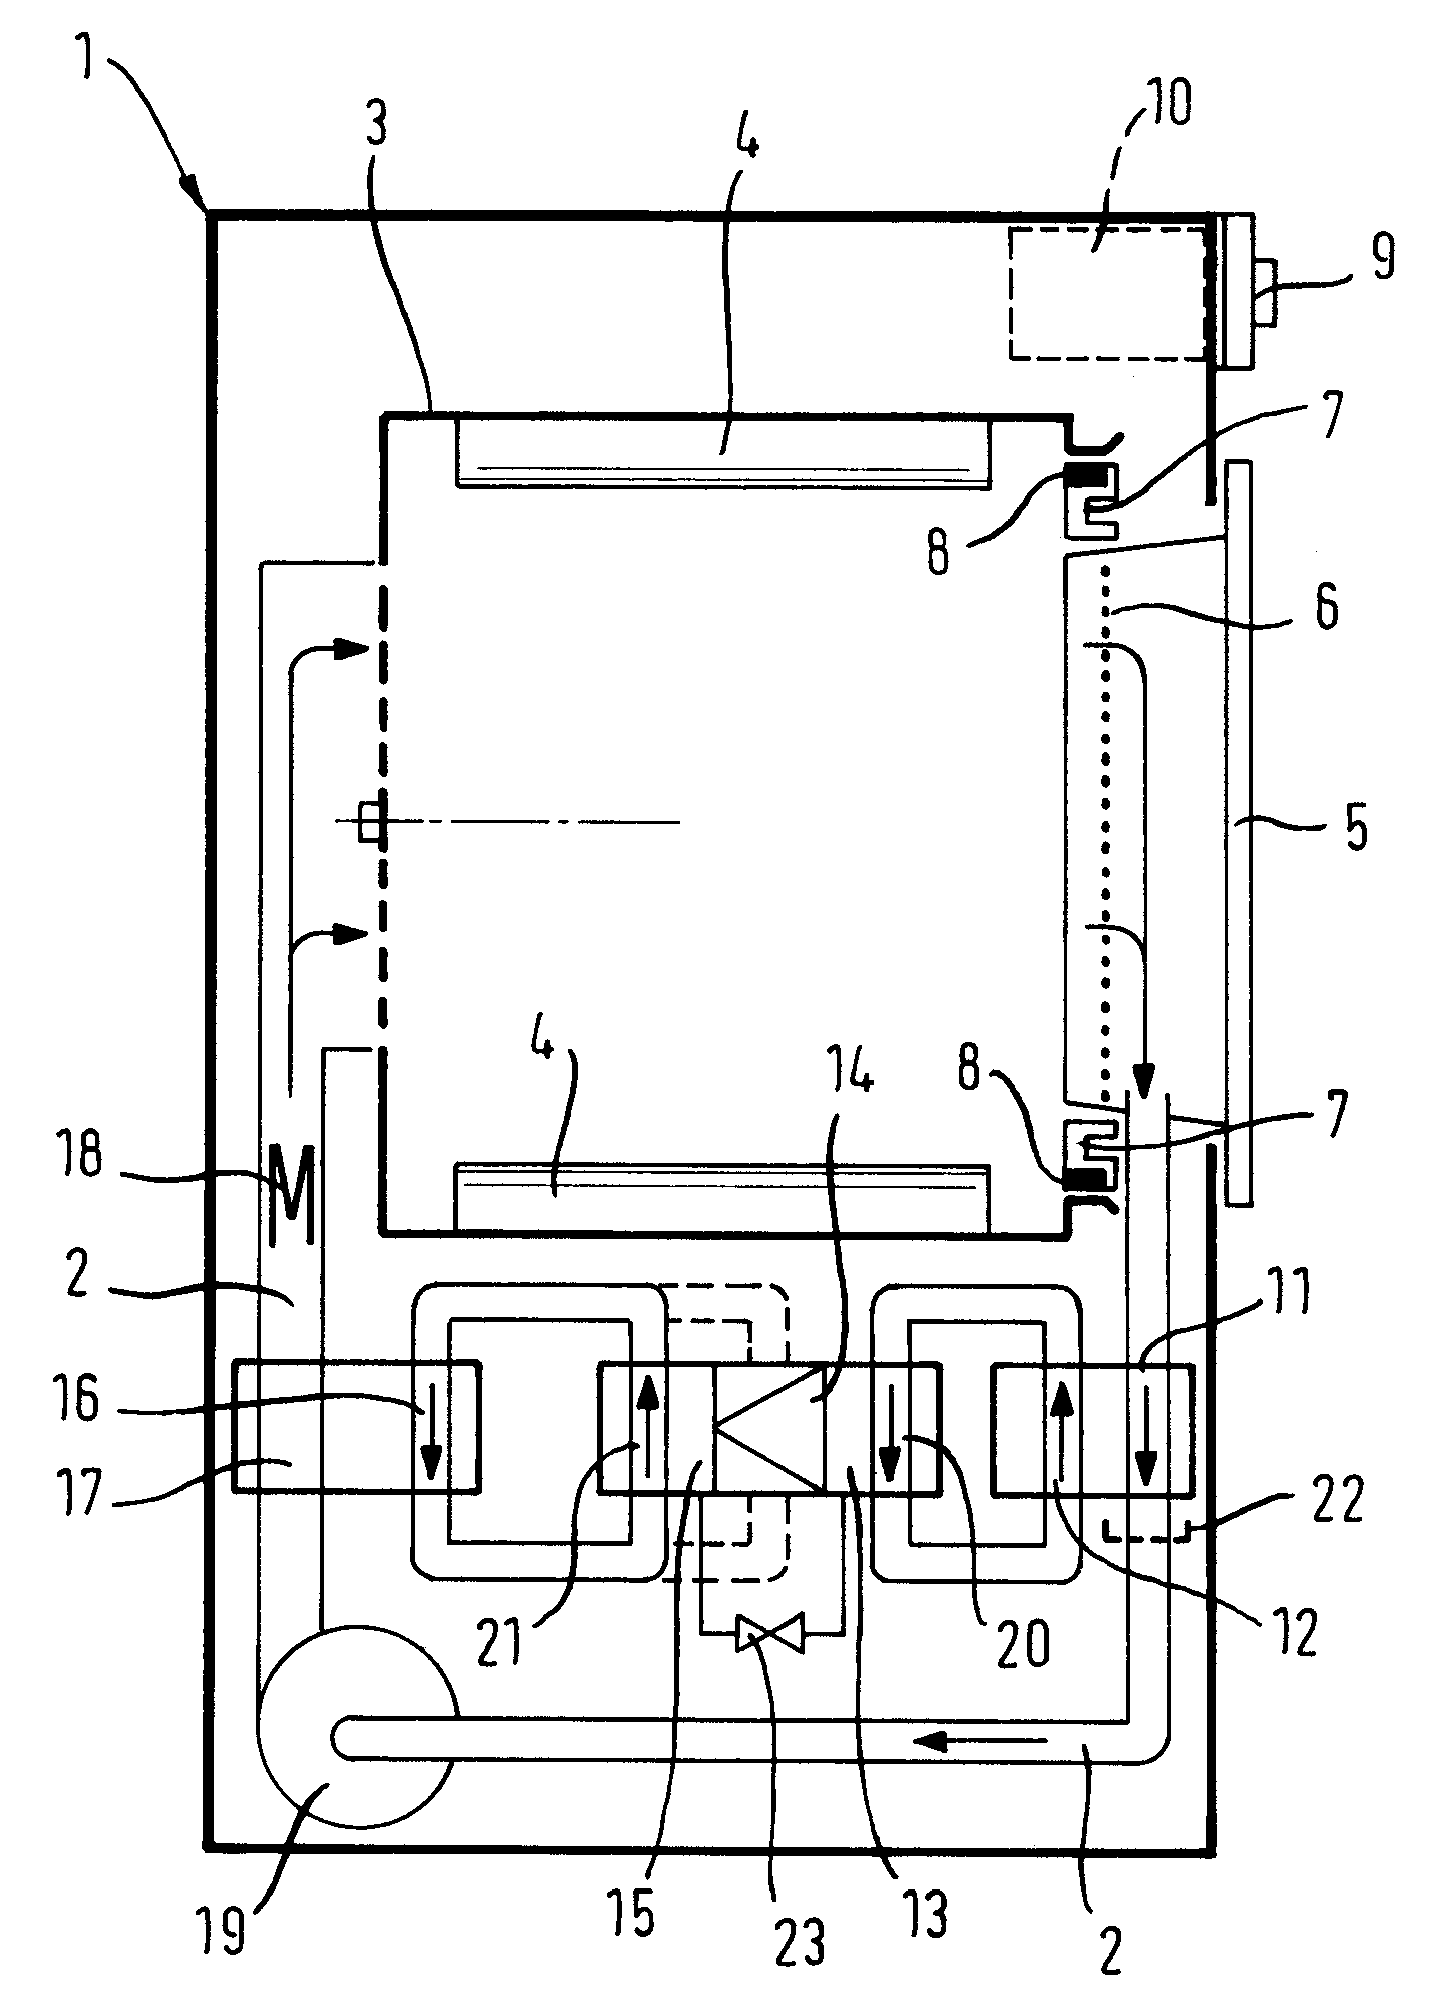 Condensation dryer having a heat pump and method for the operation thereof